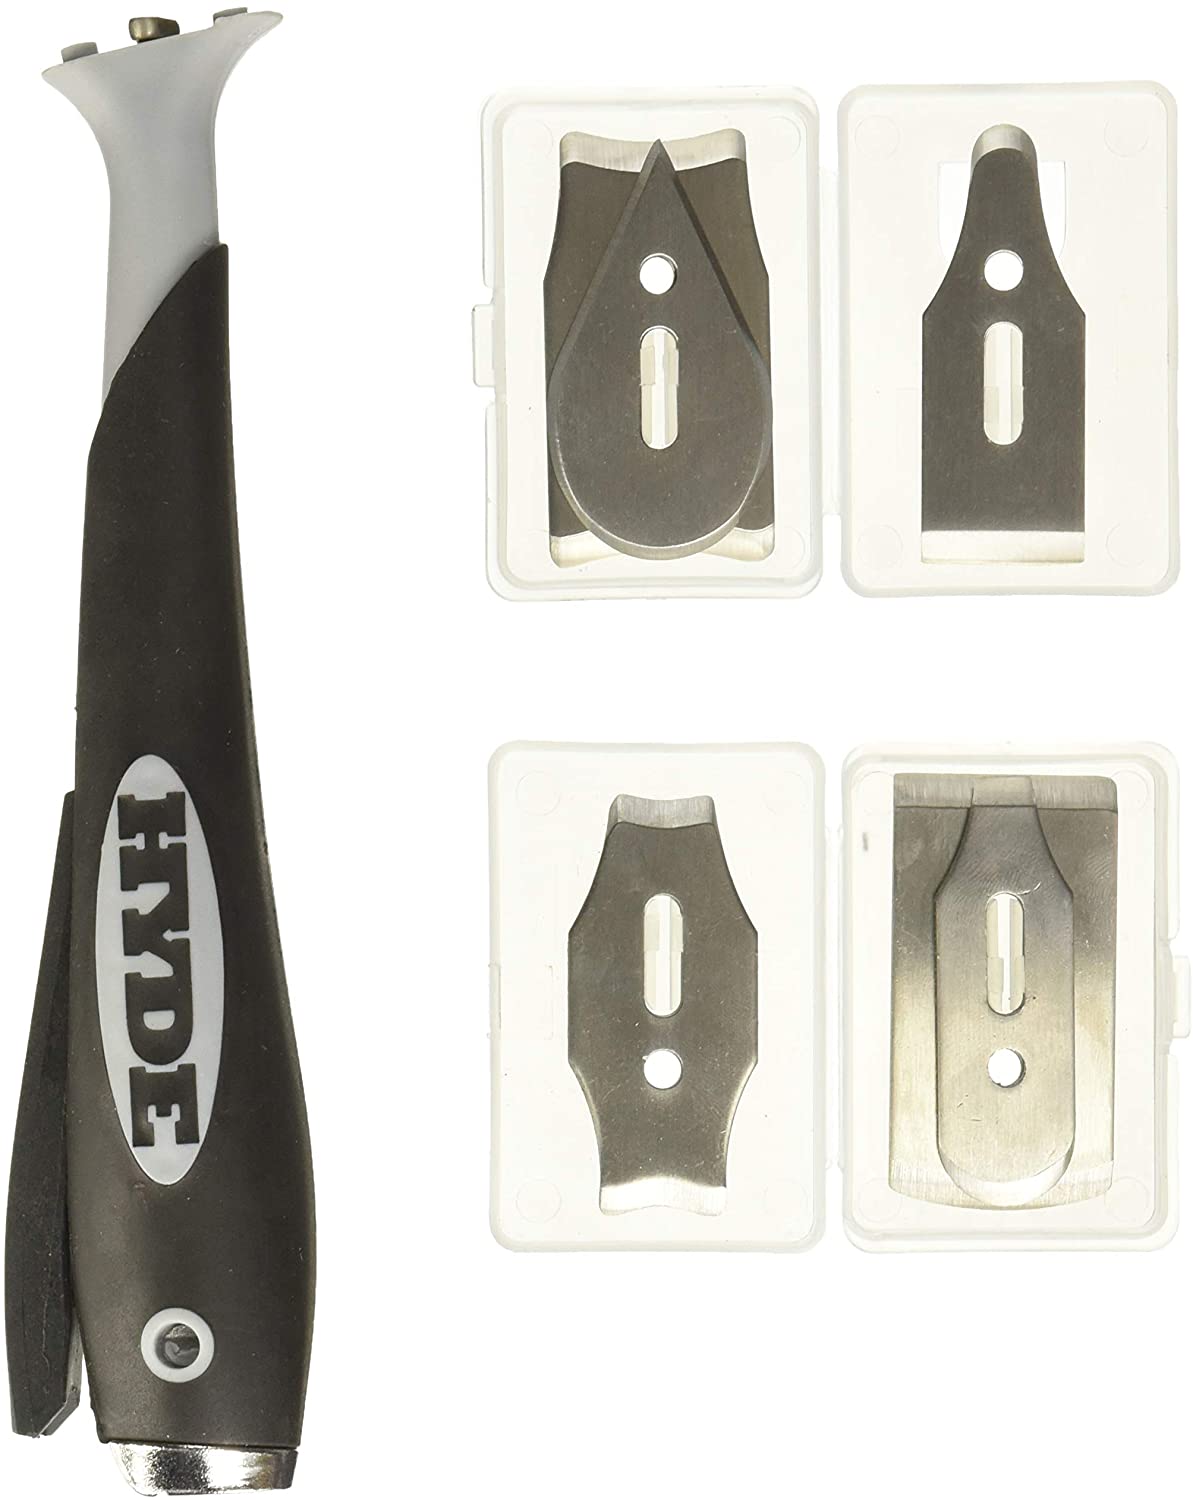 HYDE Contour Stainless Steel Blades Paint Scraper For Wood